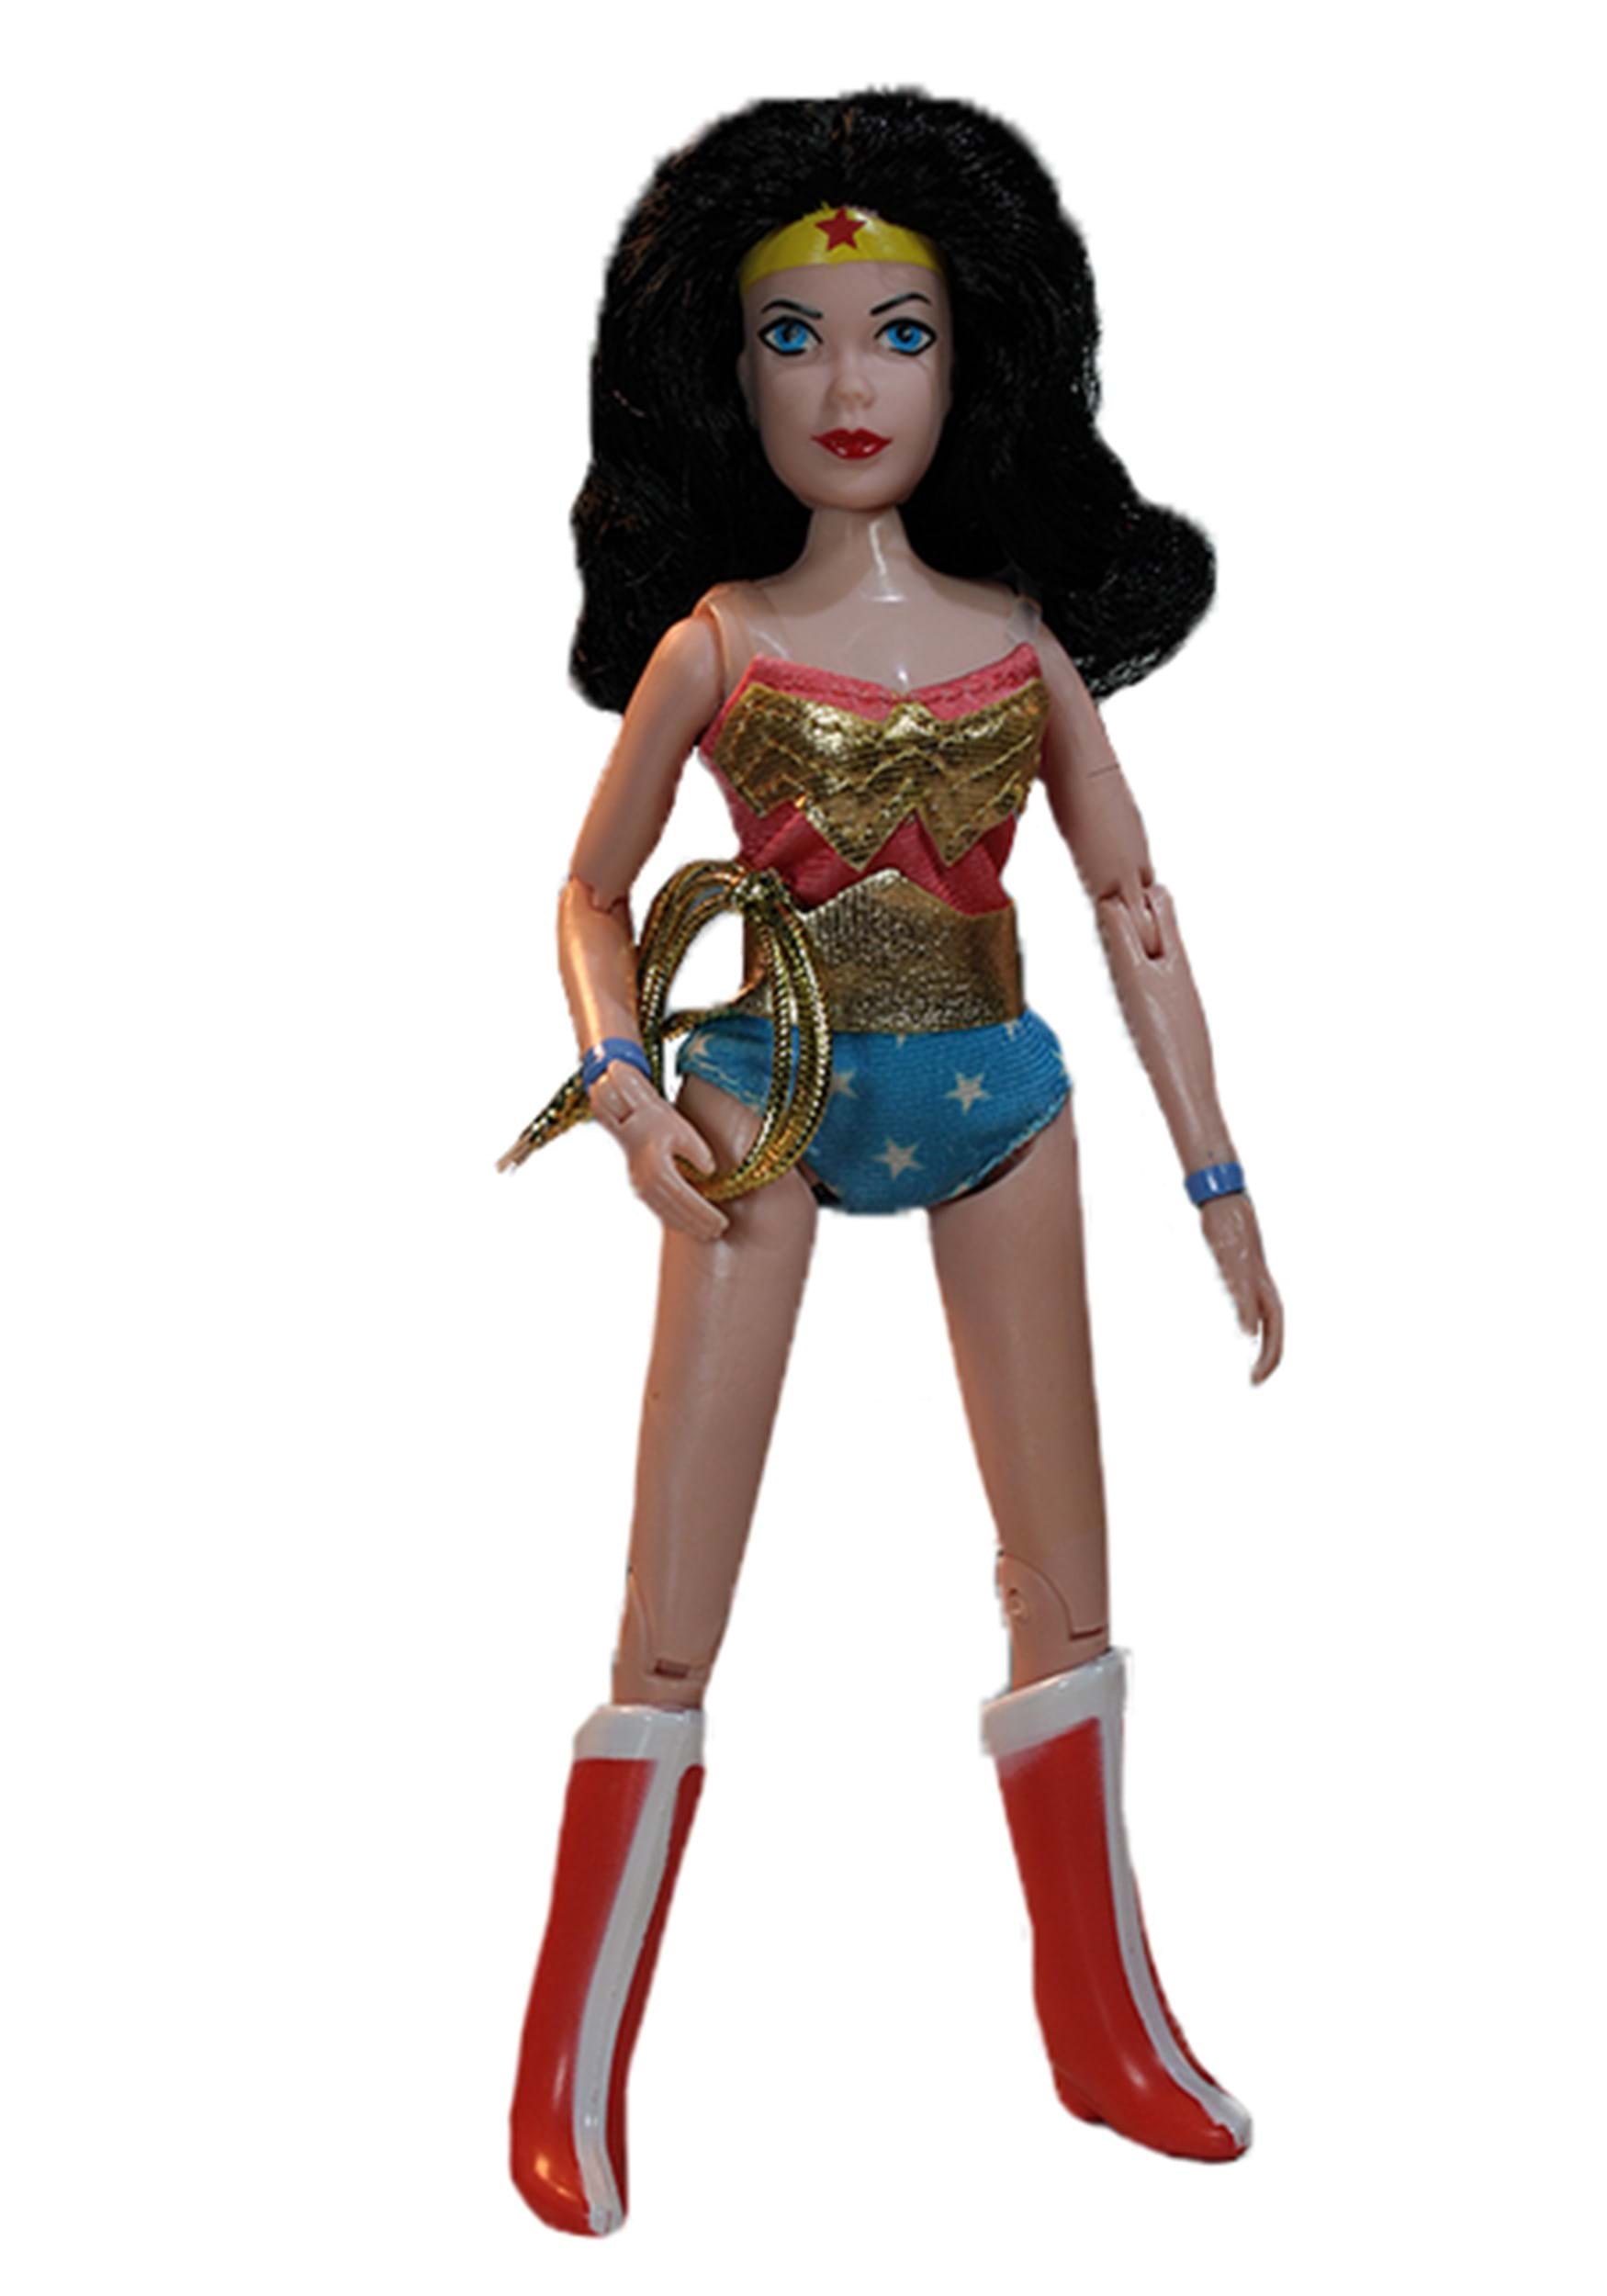 8 Inch Action Figure of Wonder Woman